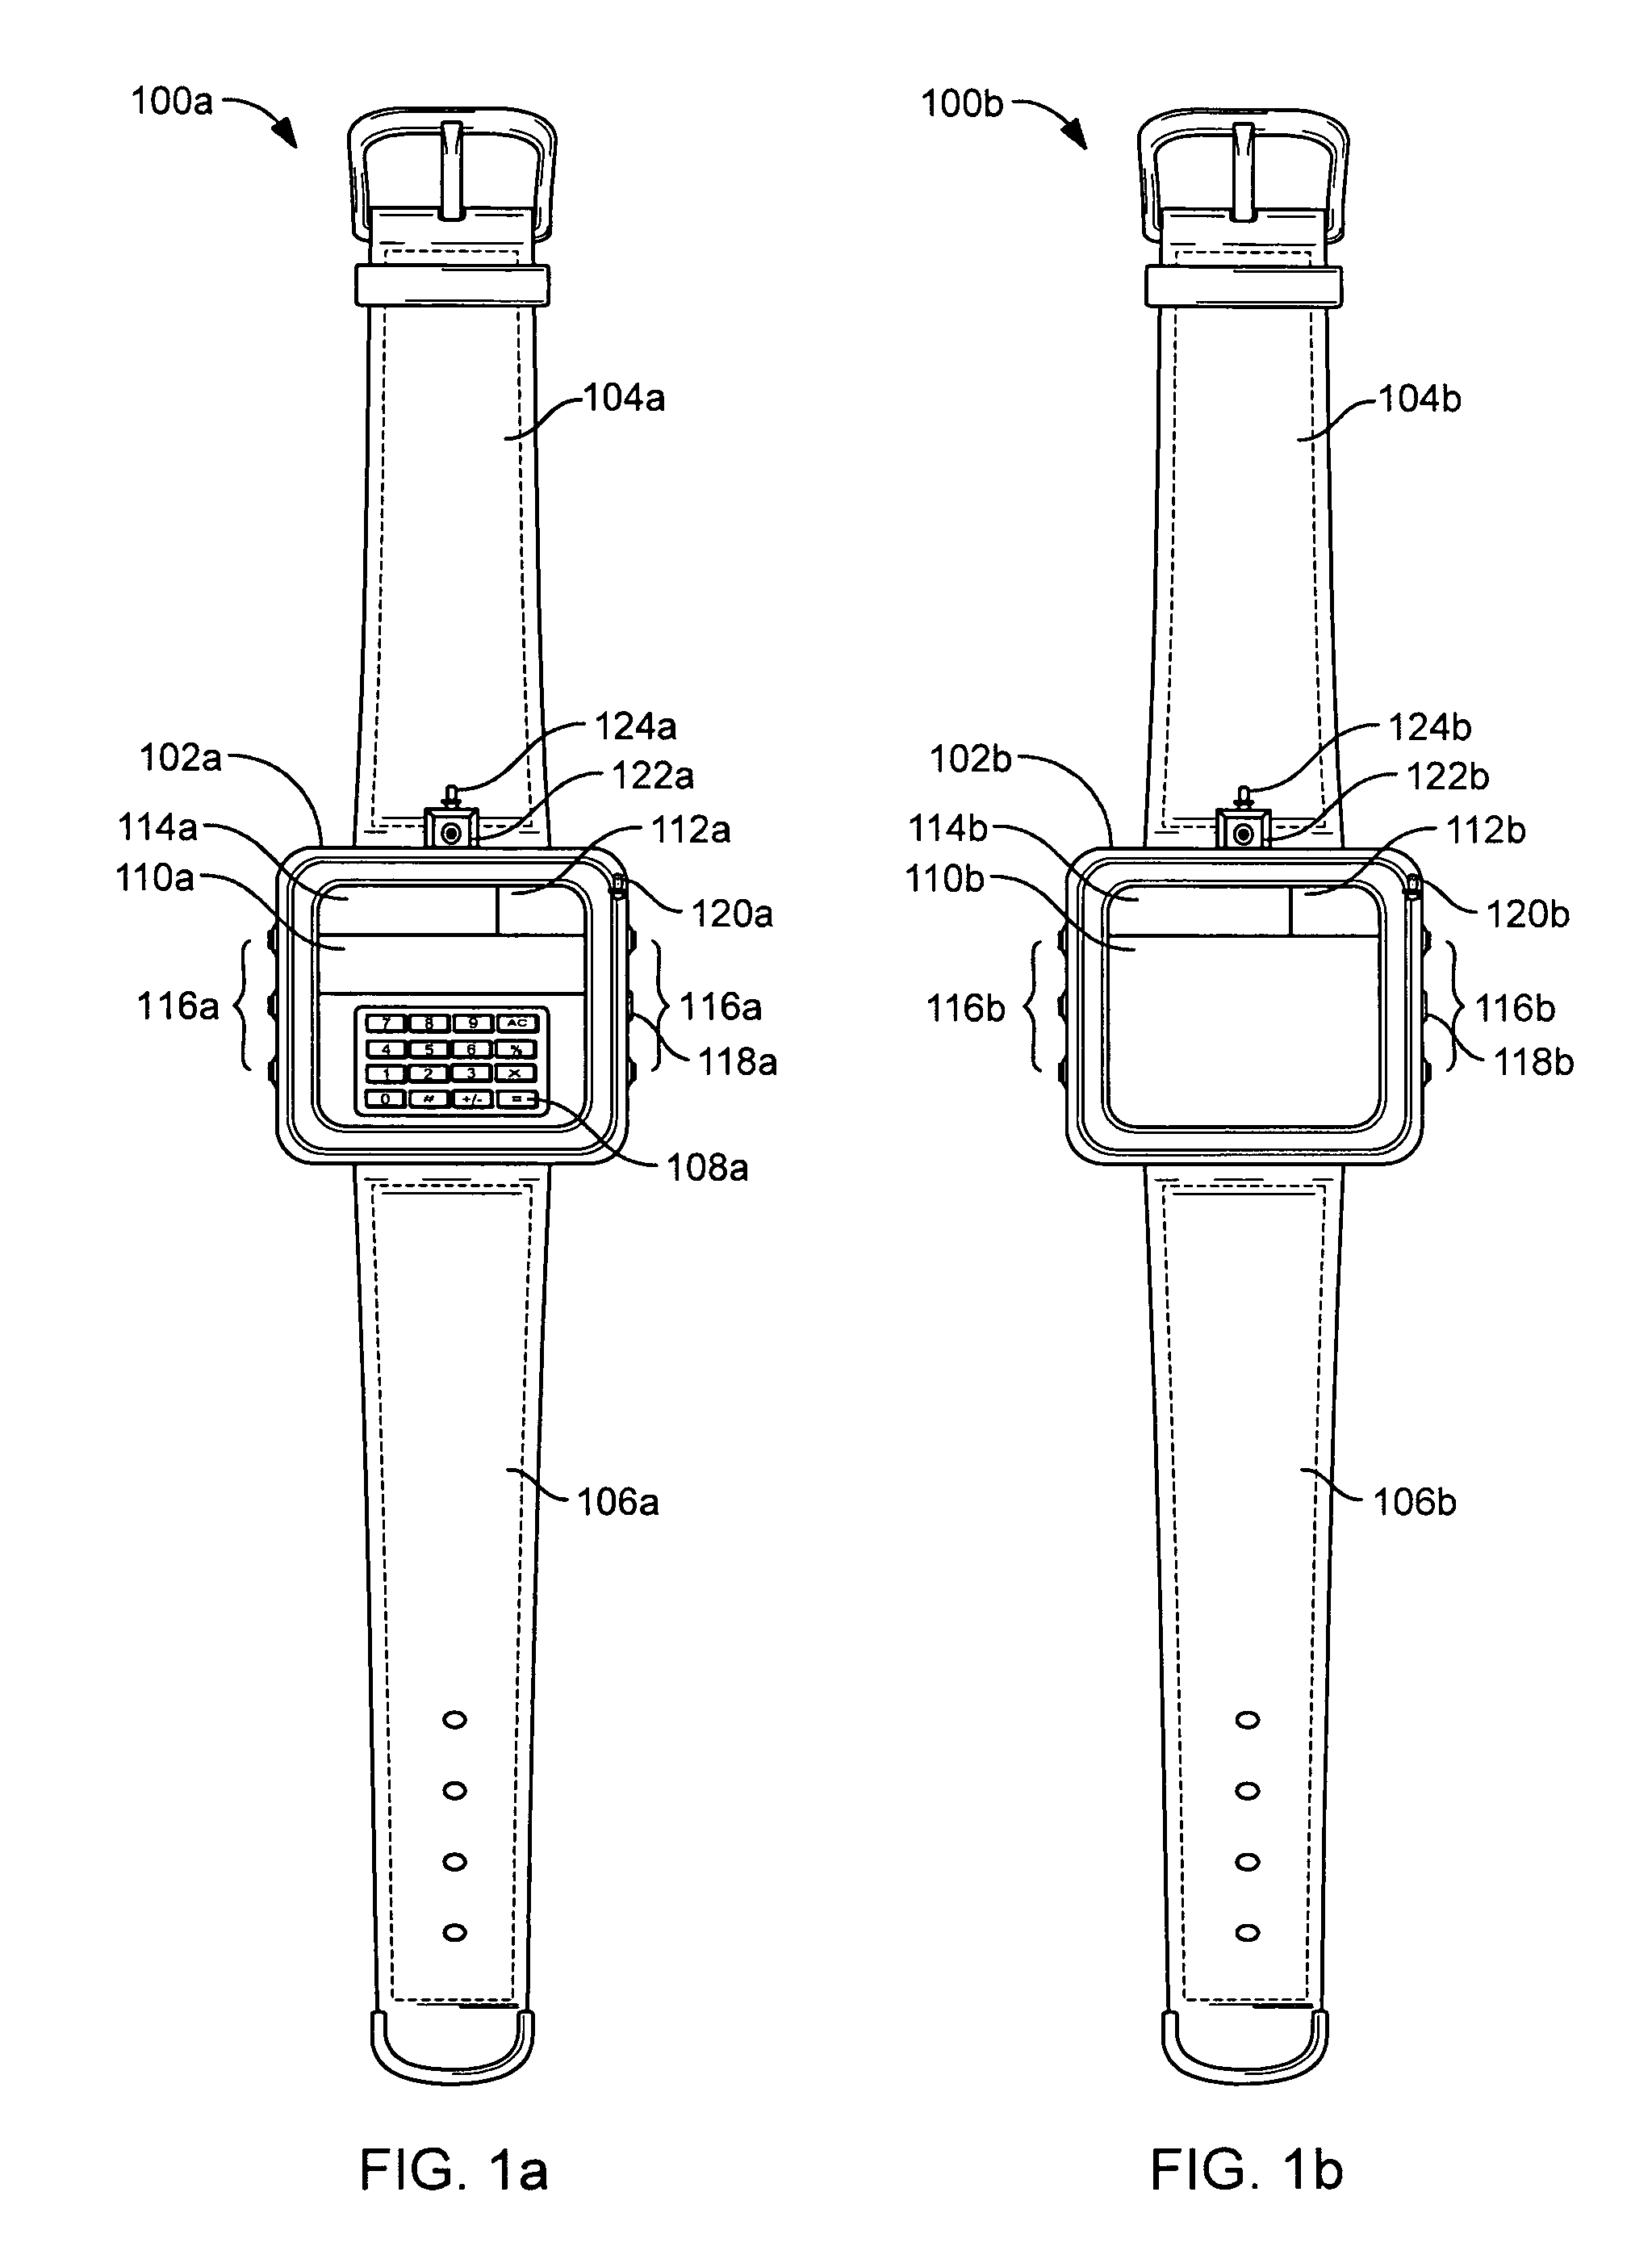 User wearable portable communication device for collection and transmission of physiological data